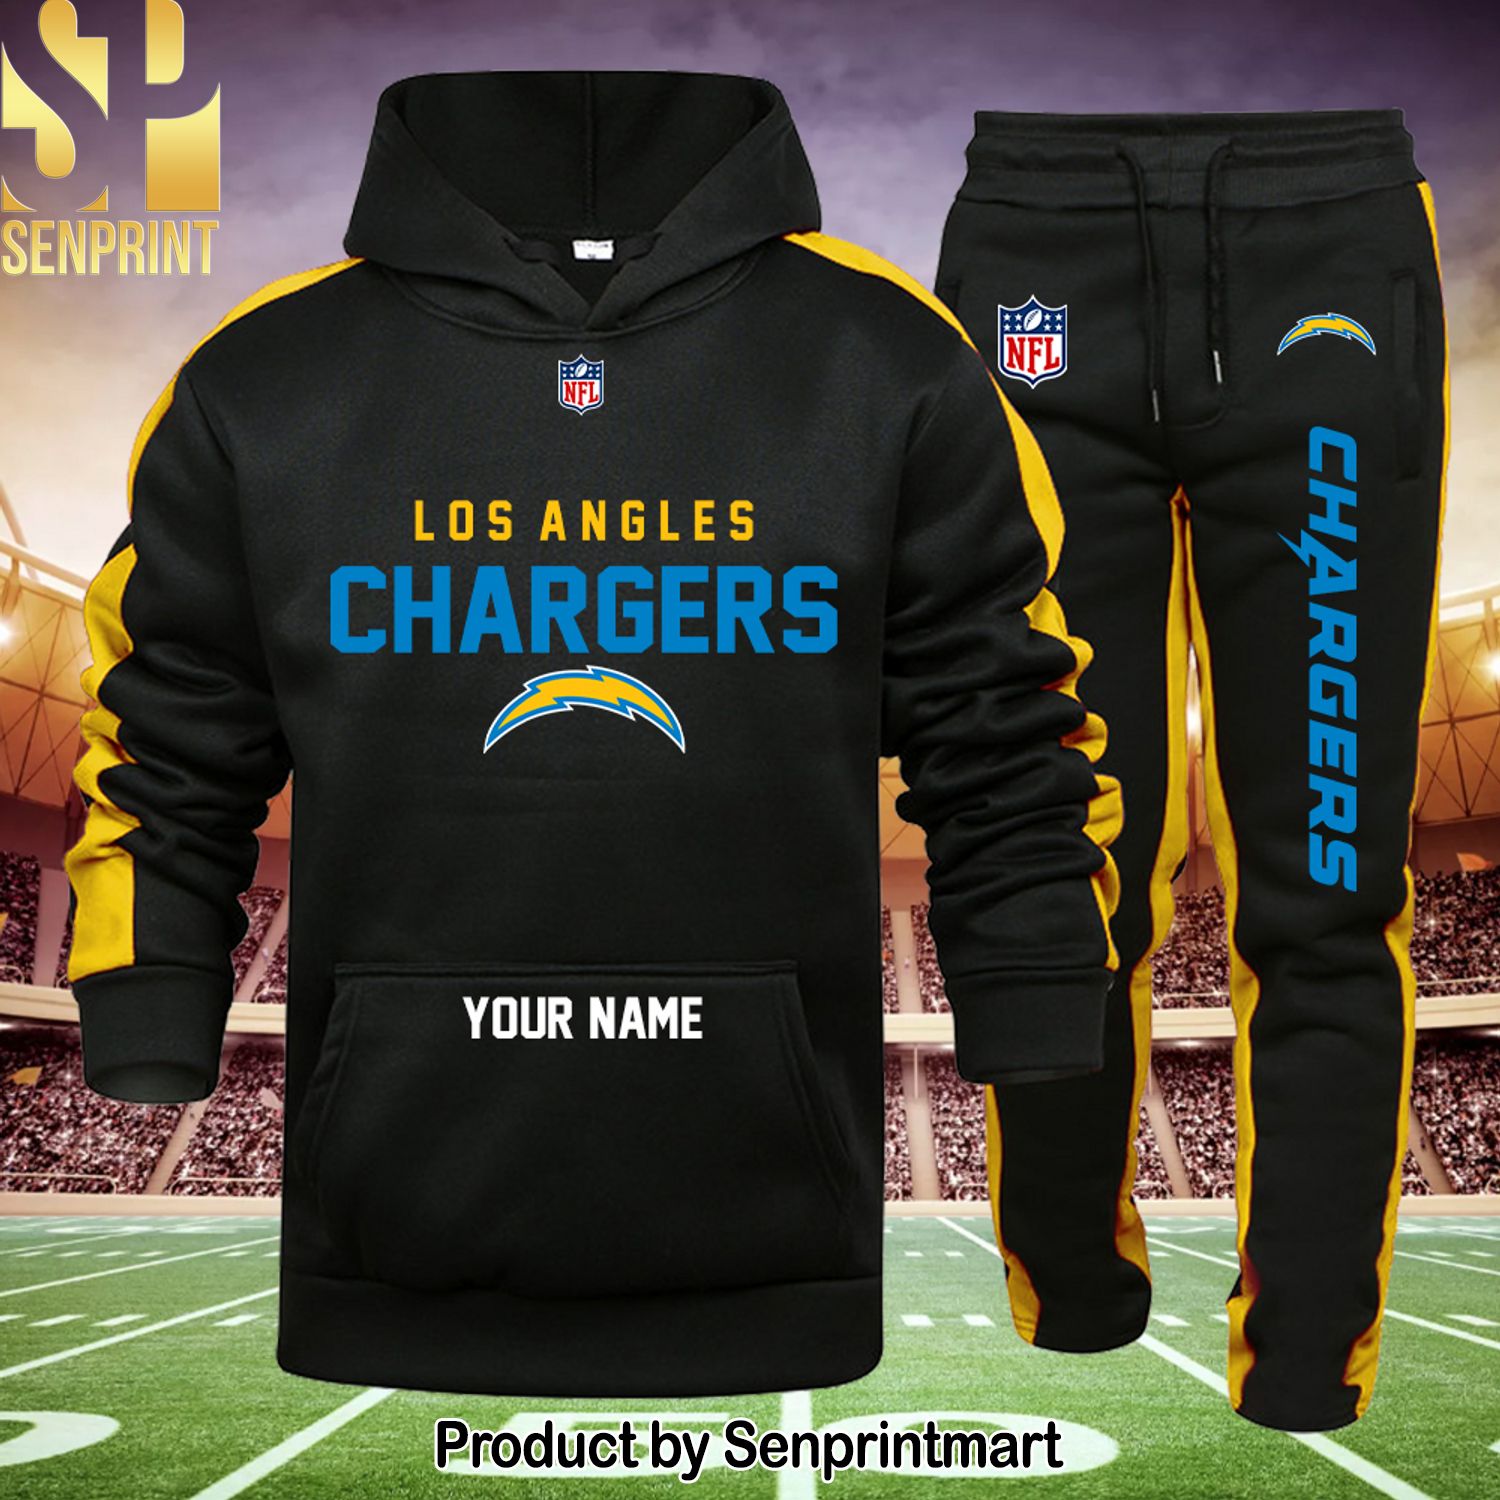 NFL Los Angeles Chargers 3D Full Printing Shirt and Sweatpants